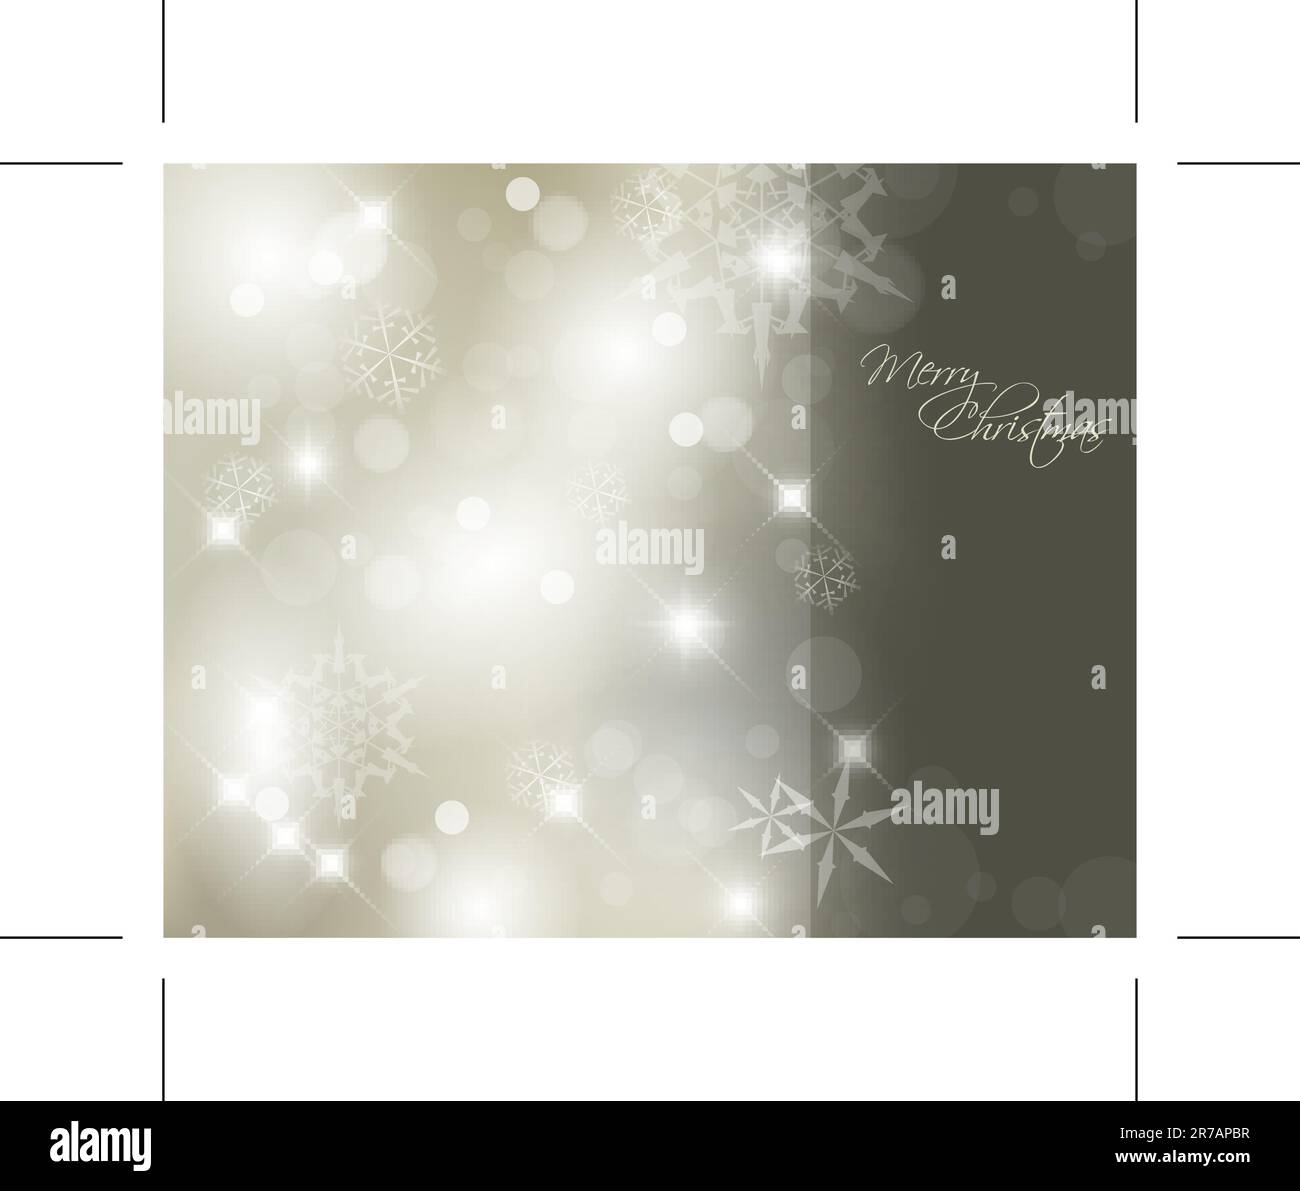 Vector Christmas background with white snowflakes and darker place for your text Stock Vector